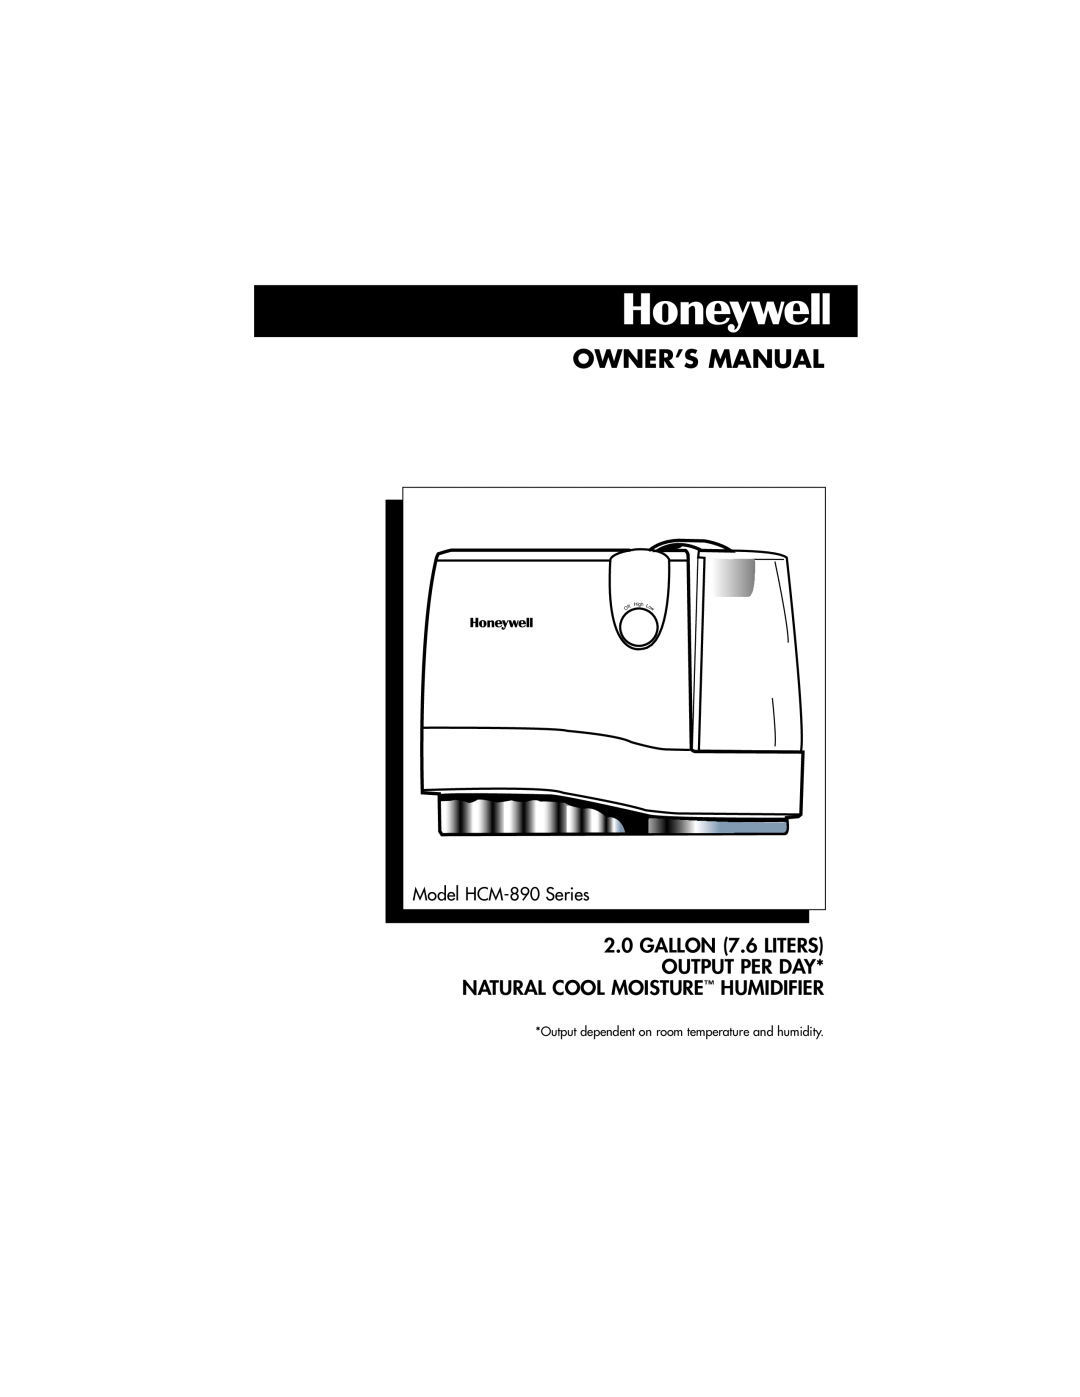 Honeywell owner manual Model HCM-890Series, Output dependent on room temperature and humidity, High 